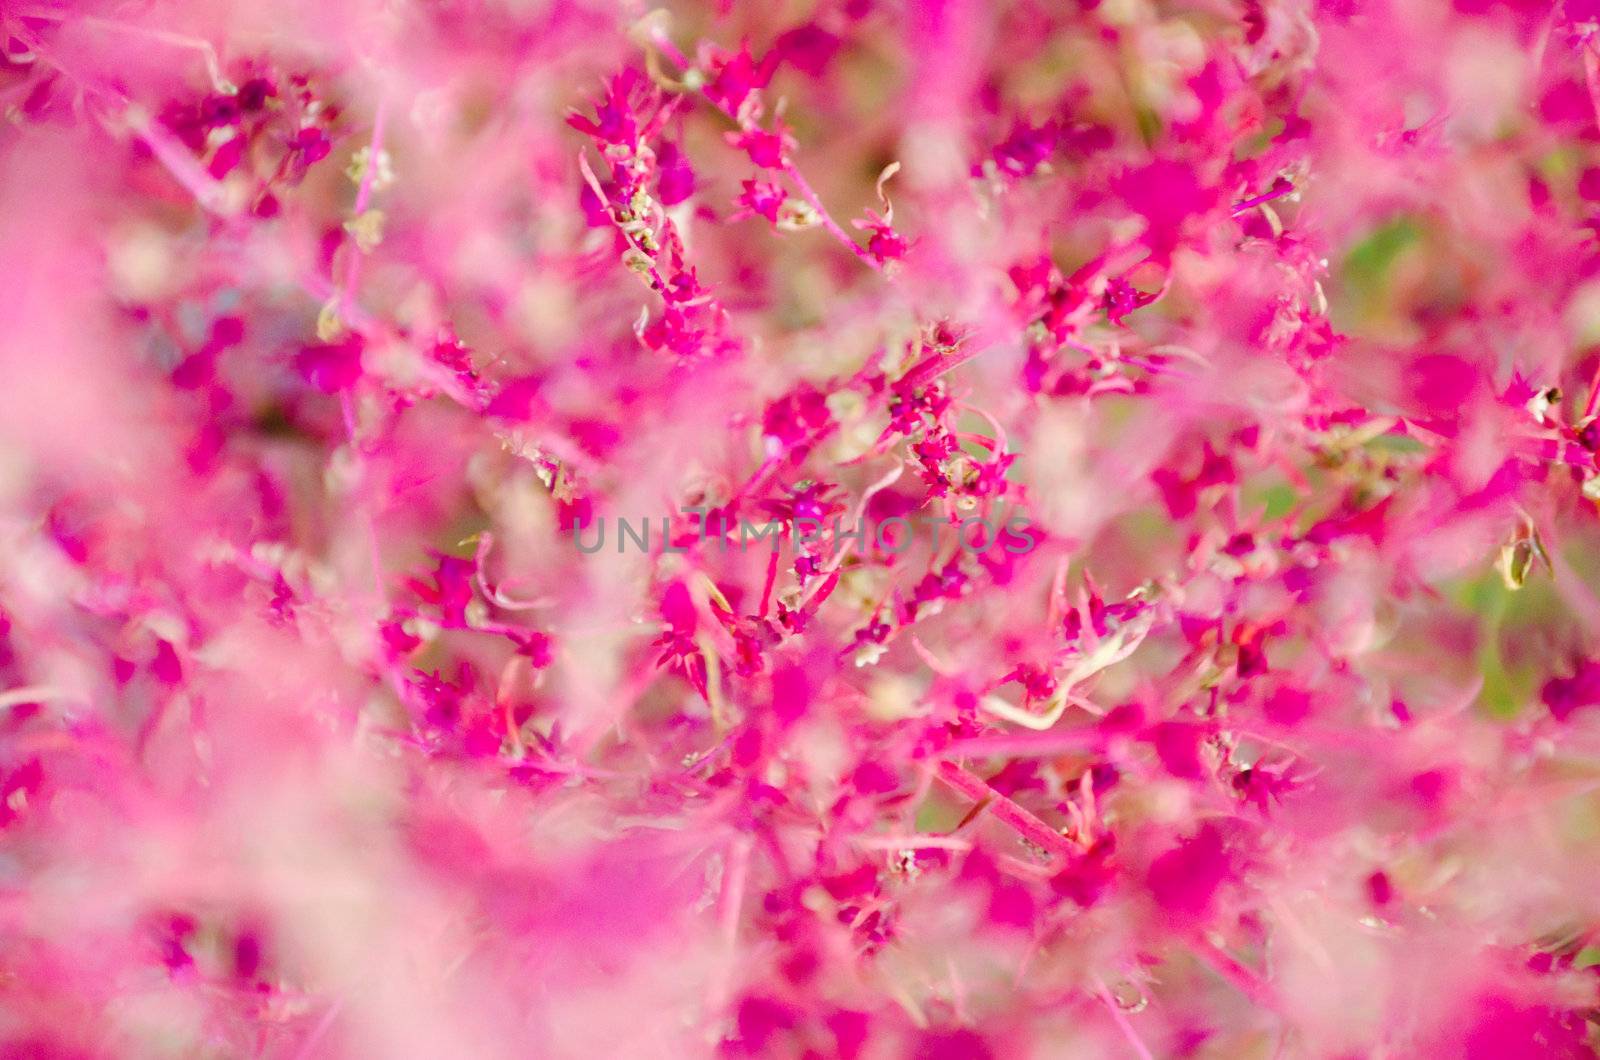 floral background with a high degree of blur